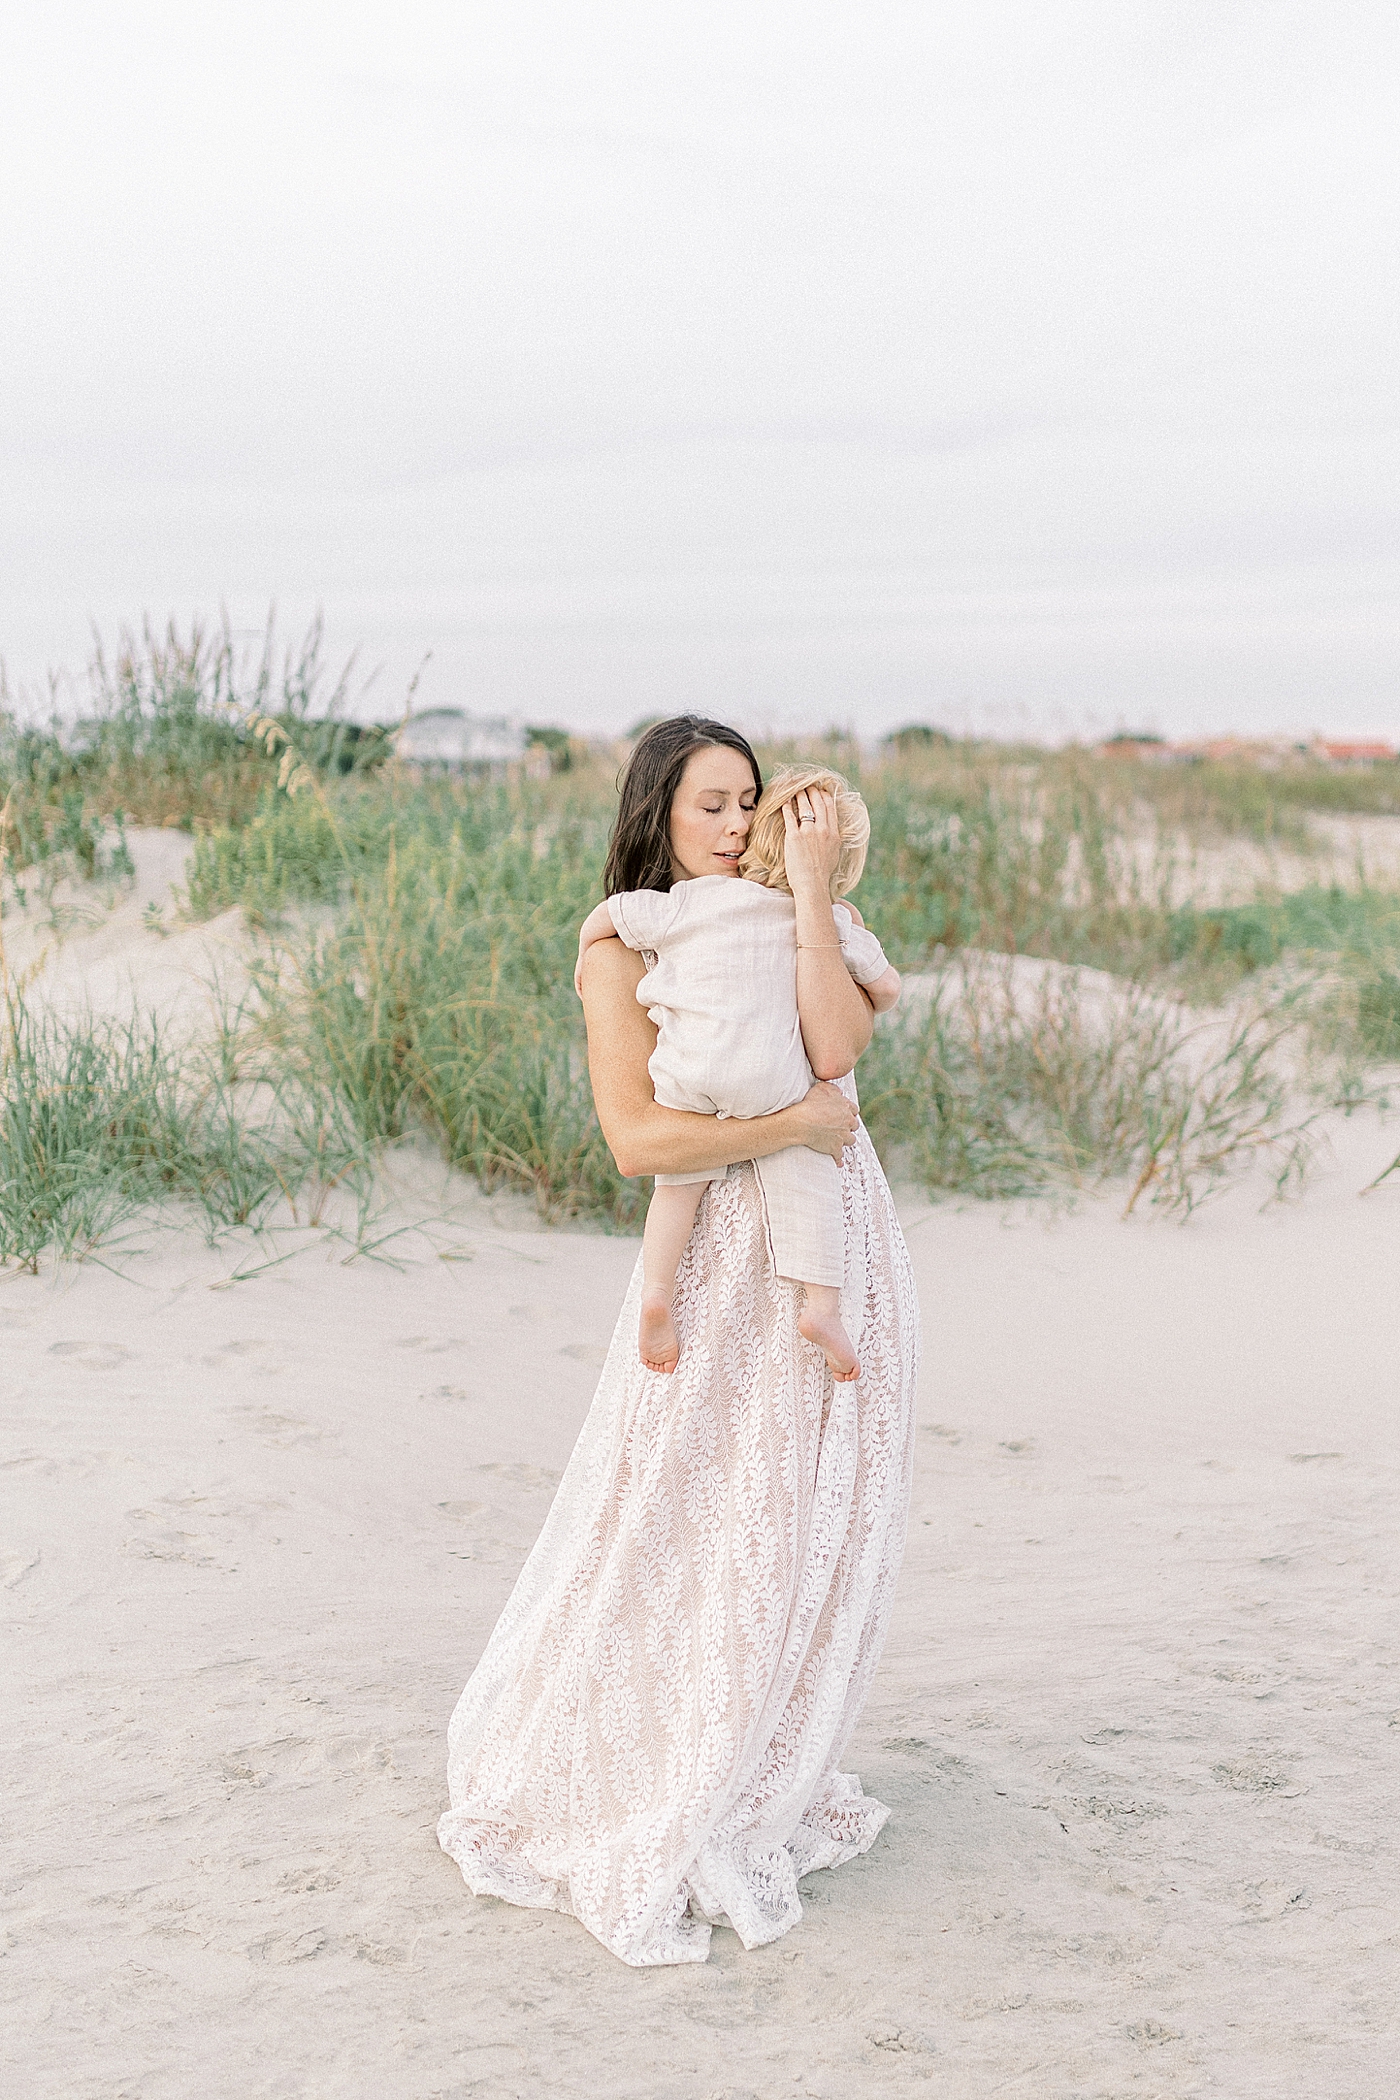 Mom holding her baby boy on the beach | Photo by Caitlyn Motycka Photography